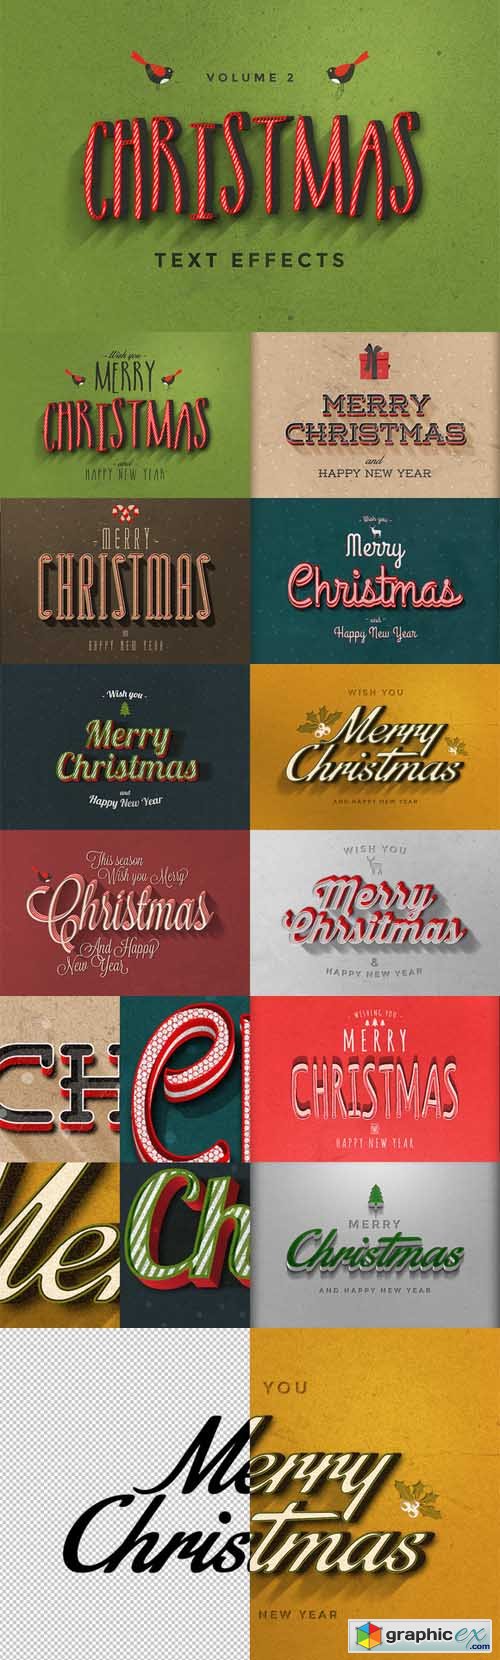 Christmas Text Effects Vol.2